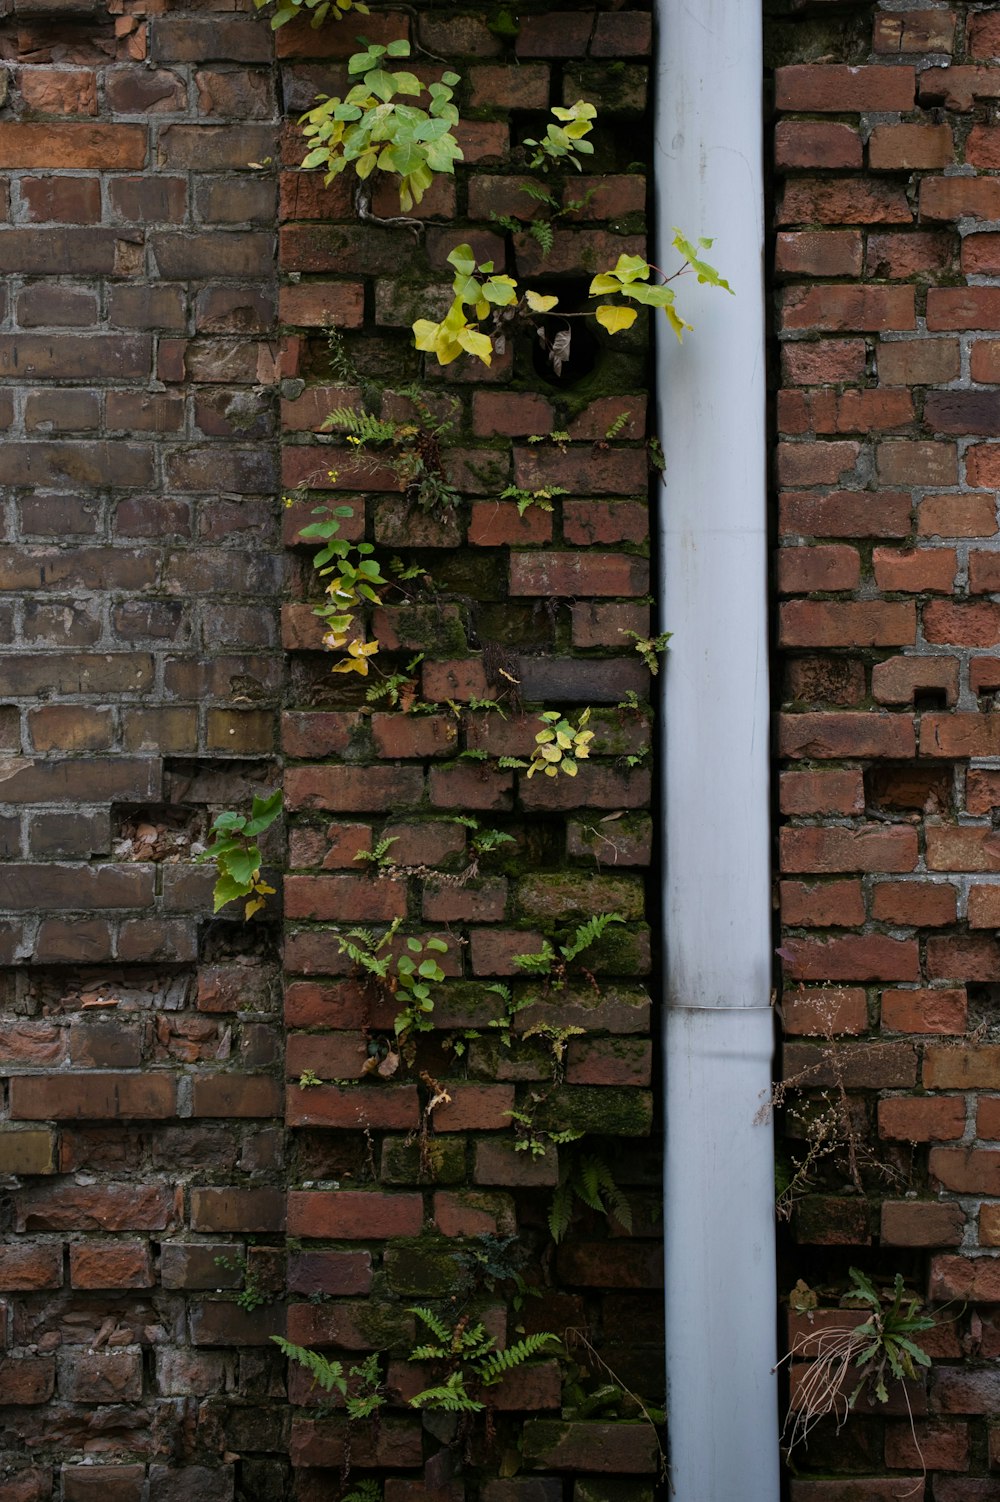 a brick wall with vines growing on it